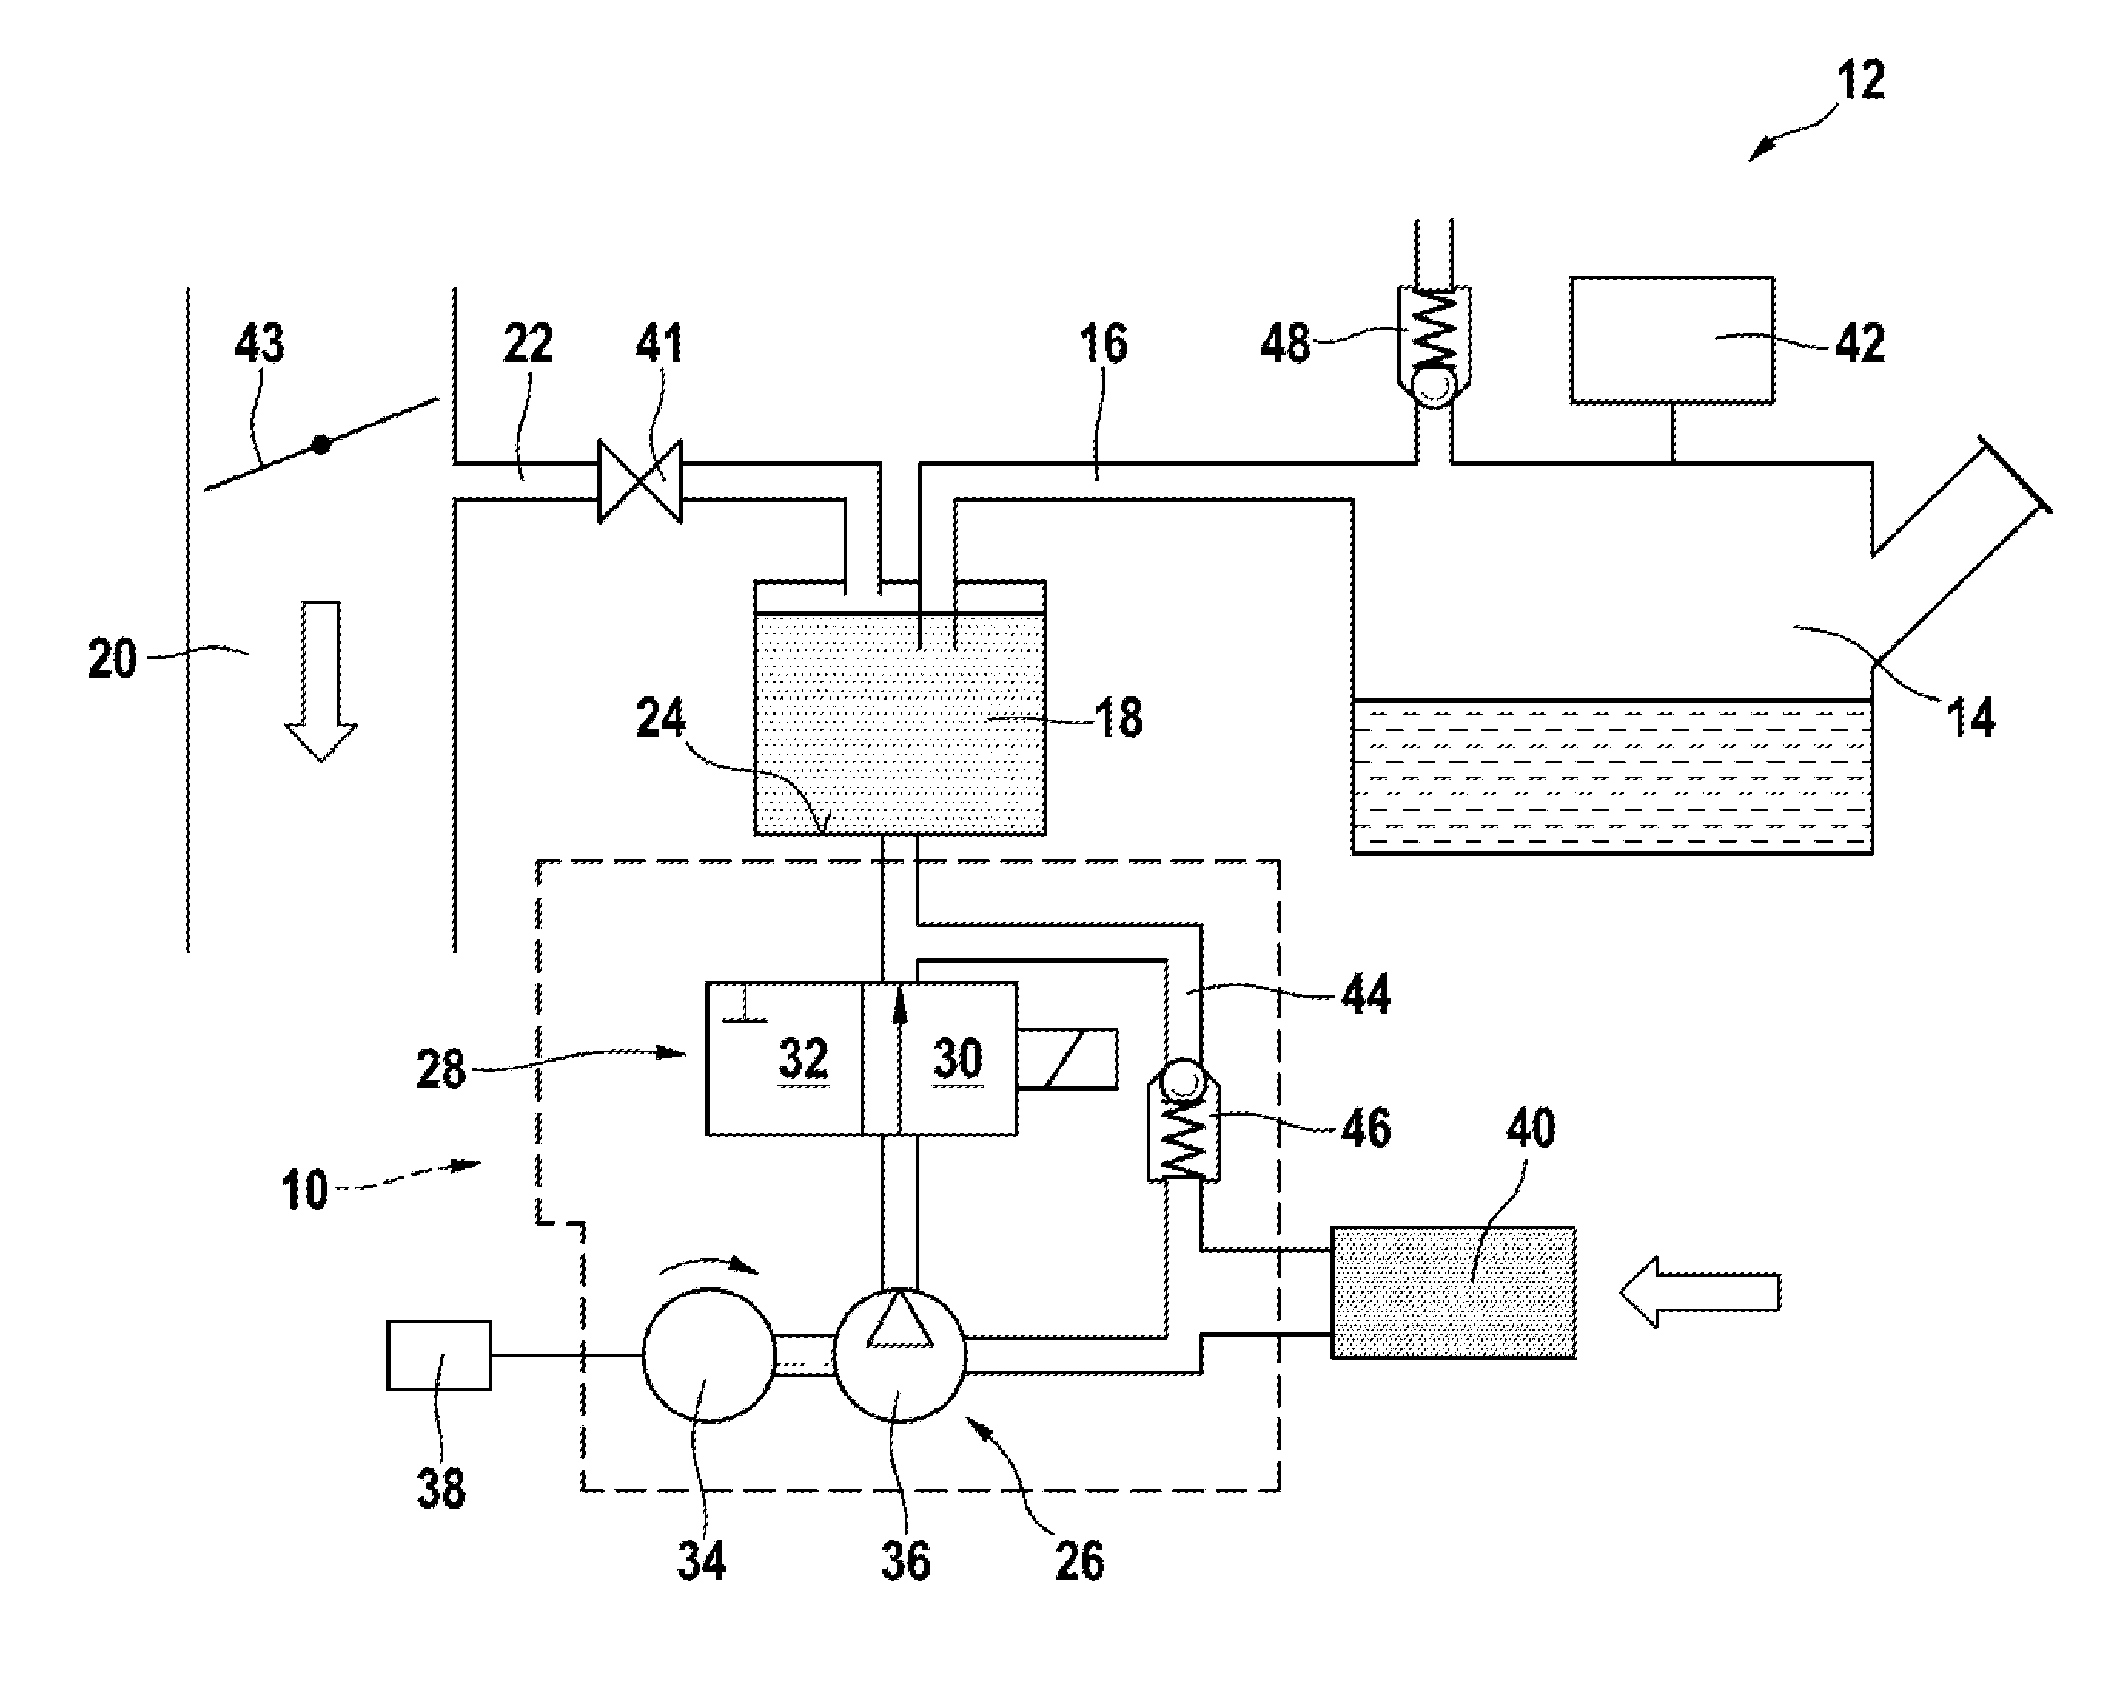 Device for selectively regenerating or performing tank leakage diagnosis of a tank ventilation system